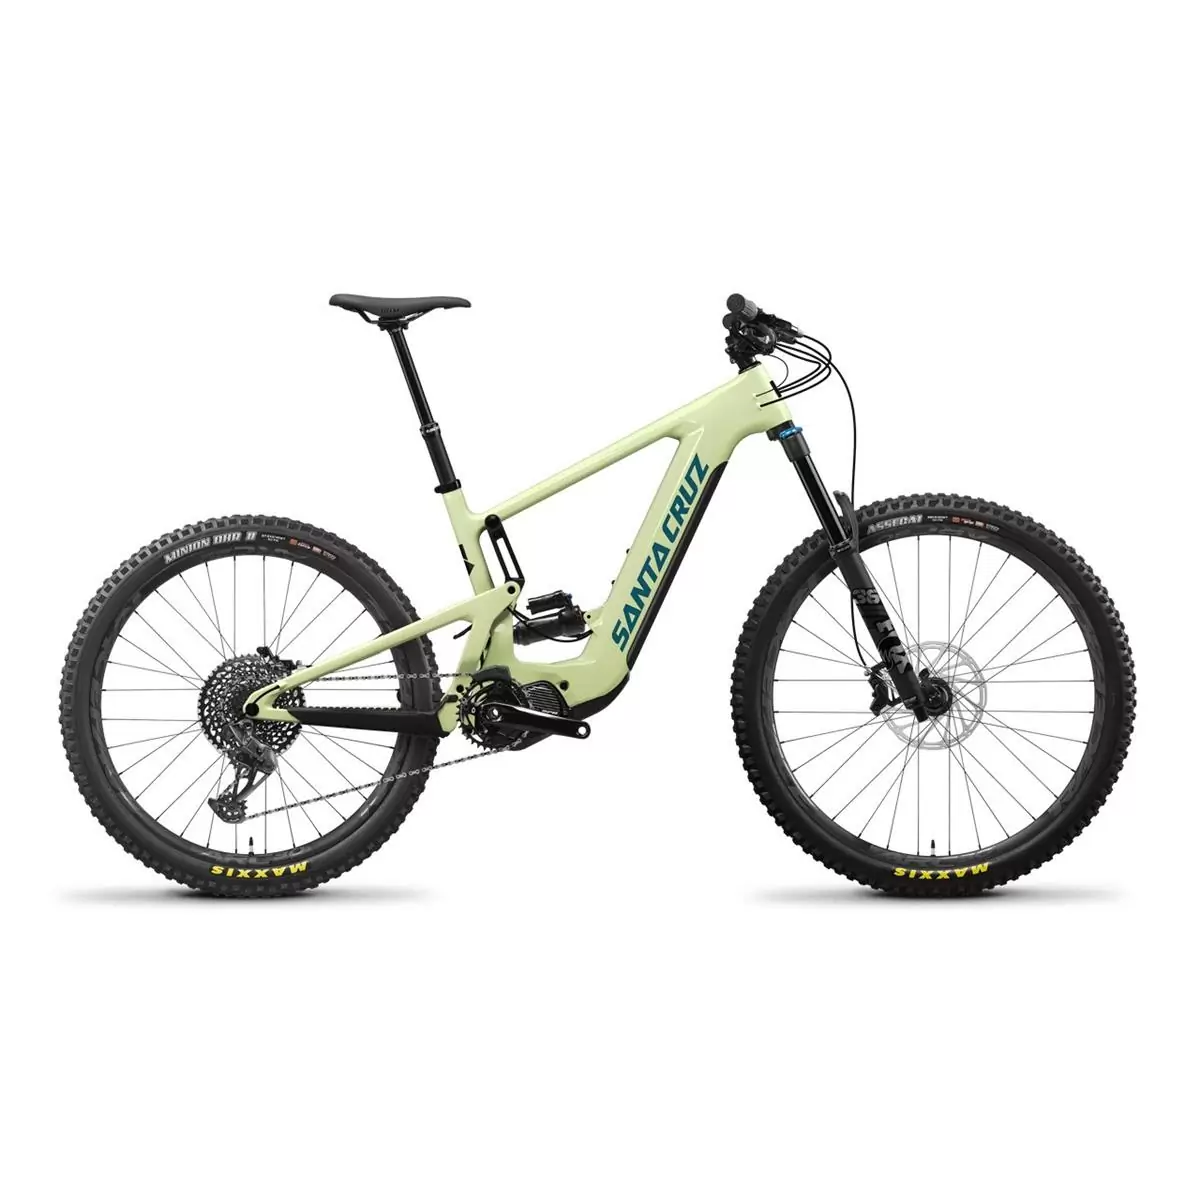 Heckler 9 C S MX 29/27.5'' 160mm 12s 720Wh Shimano EP8 Verde Aguacate 2023 Talla M - image